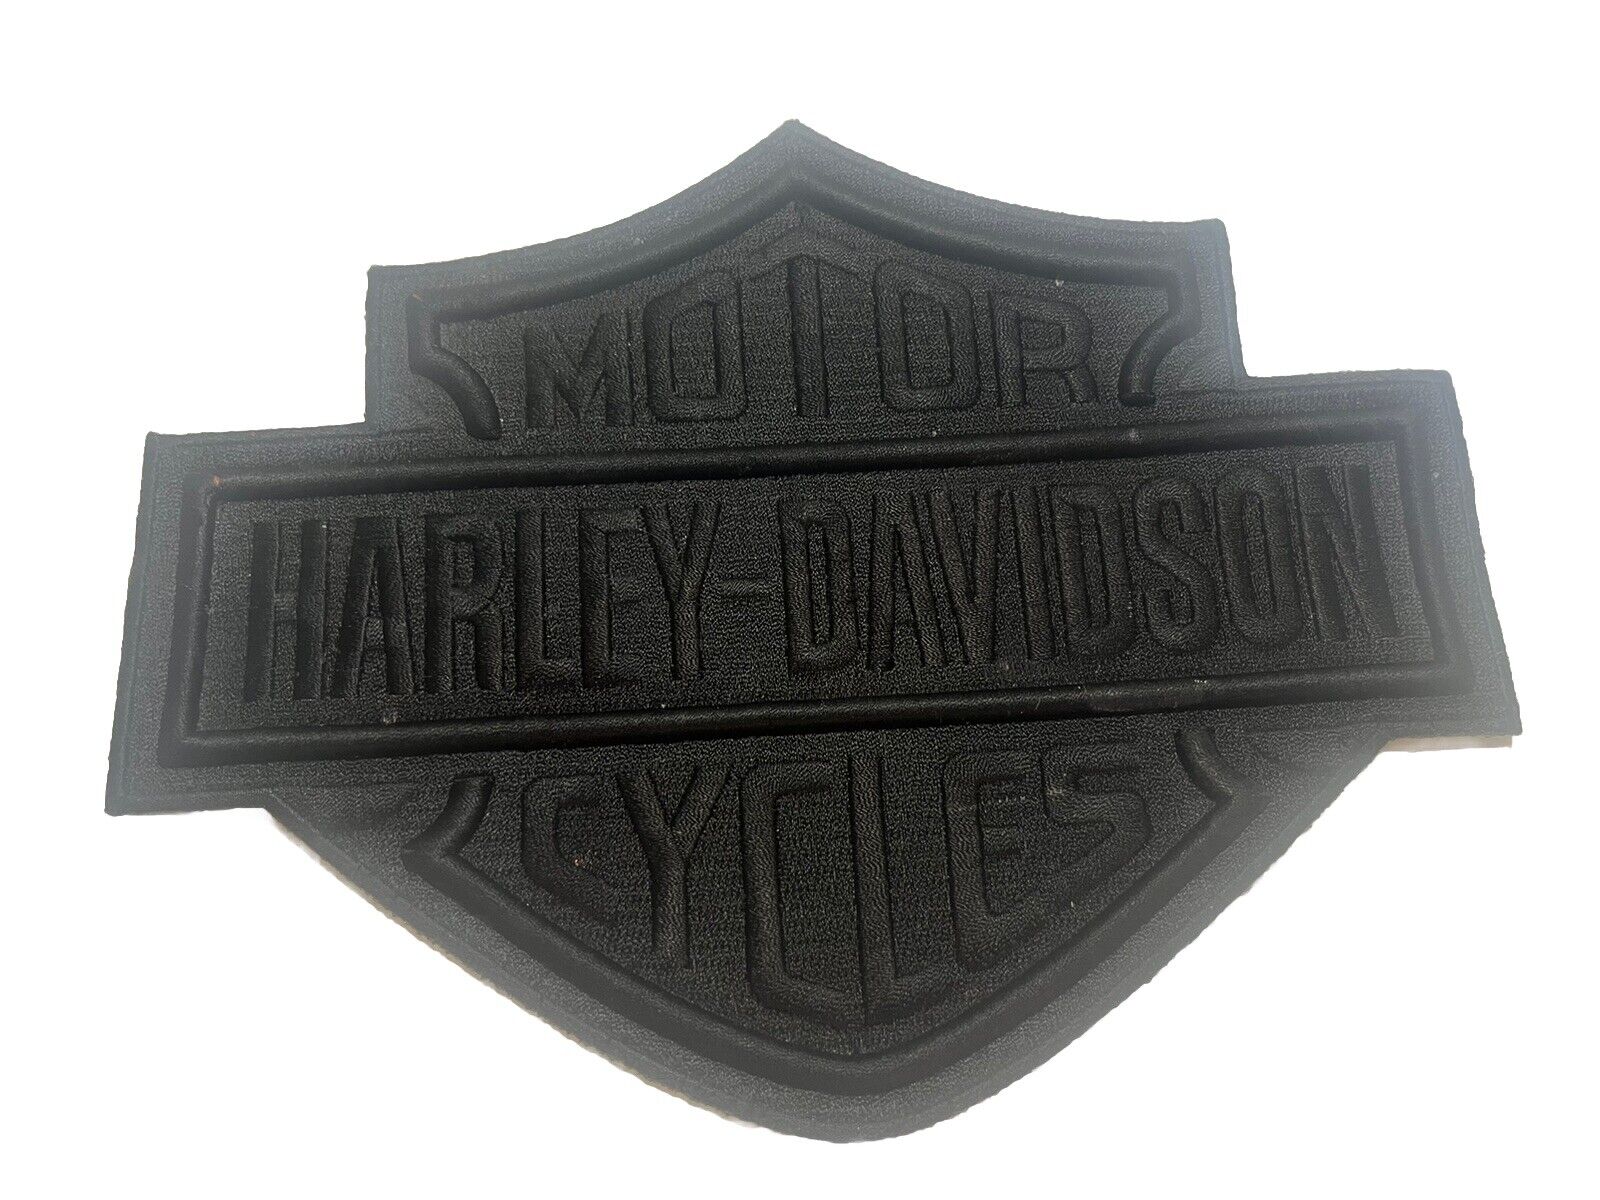 New Harley Davidson Black Bar & Shield “Large” Sew-on Patch Embroidery Patch 6x8